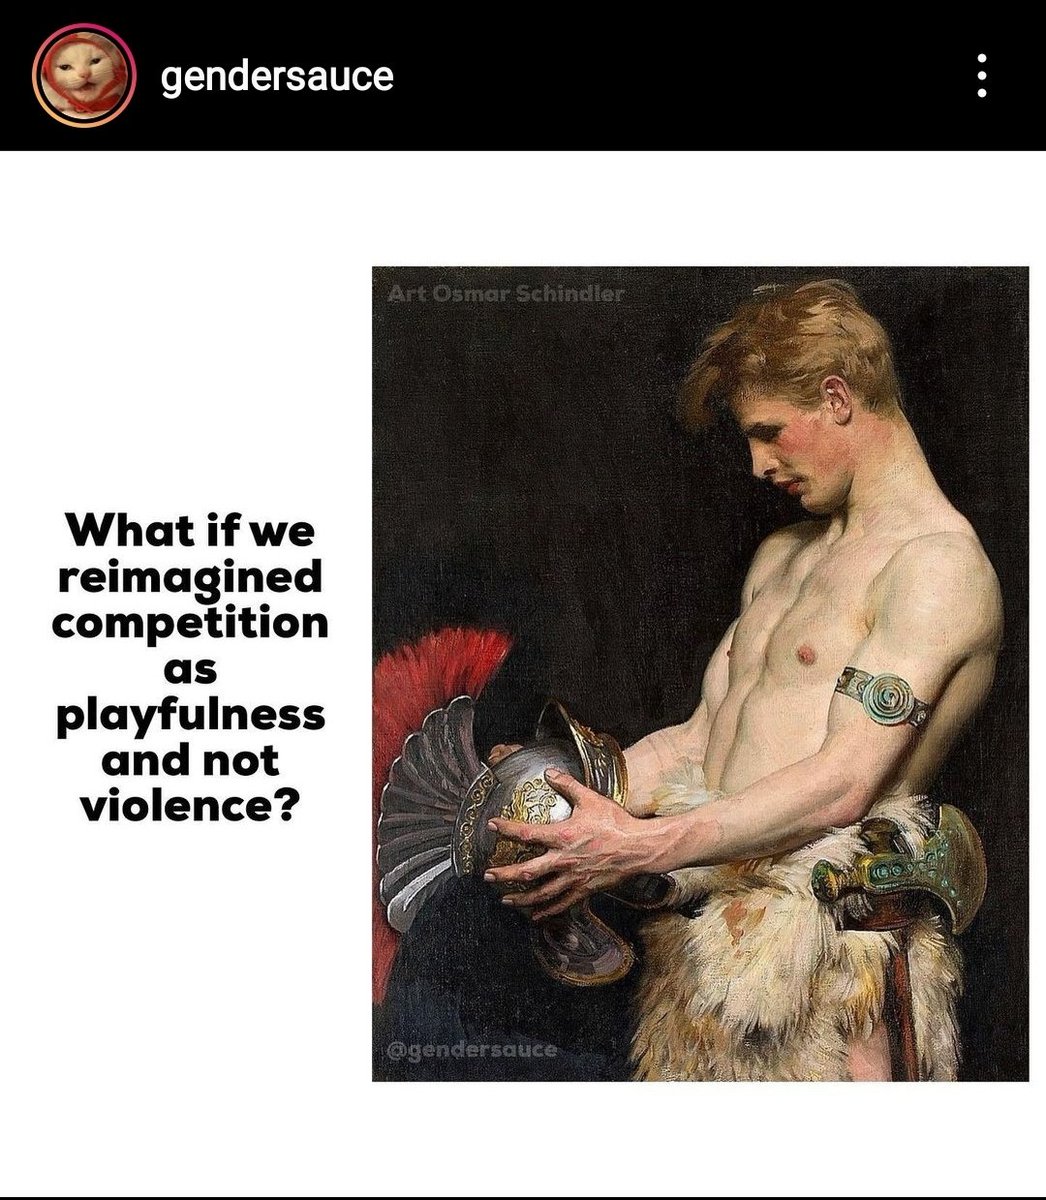 You should be following Gendersauce on IG